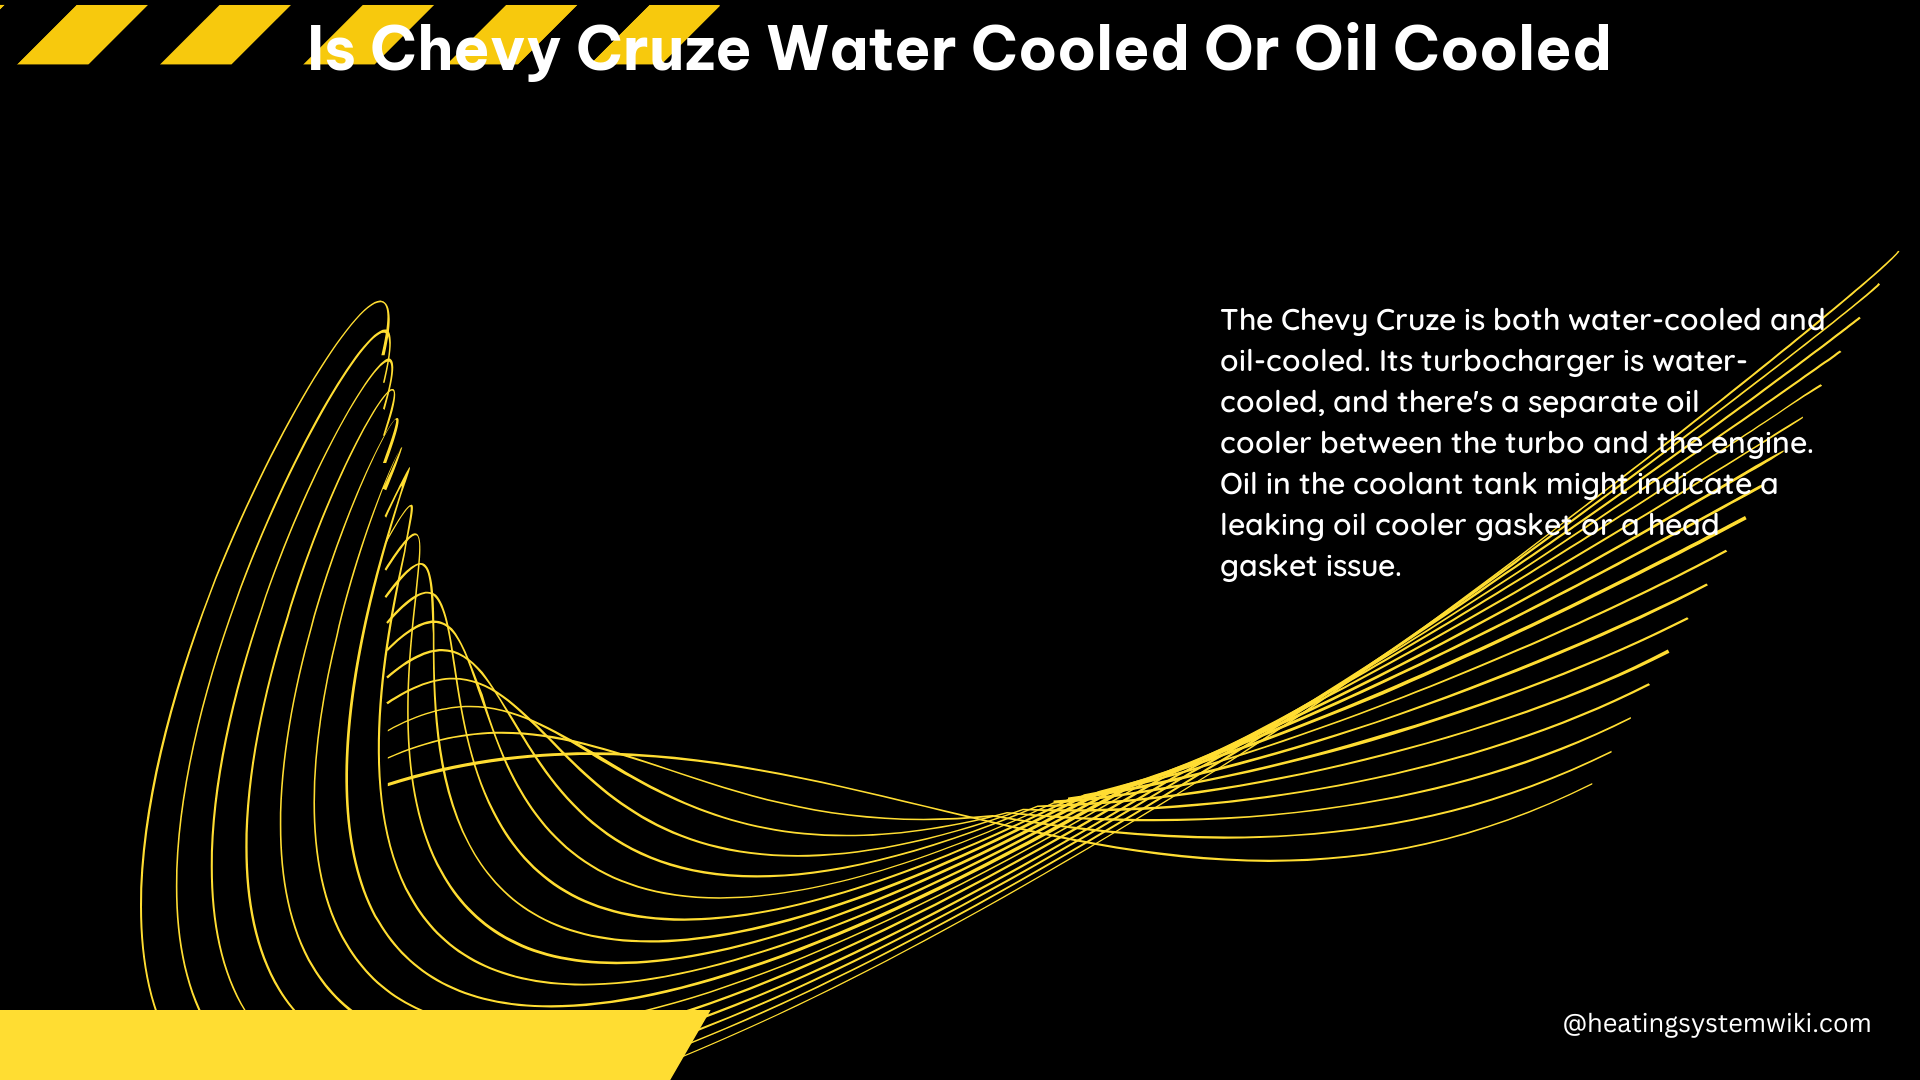 Is Chevy Cruze Water Cooled or Oil Cooled